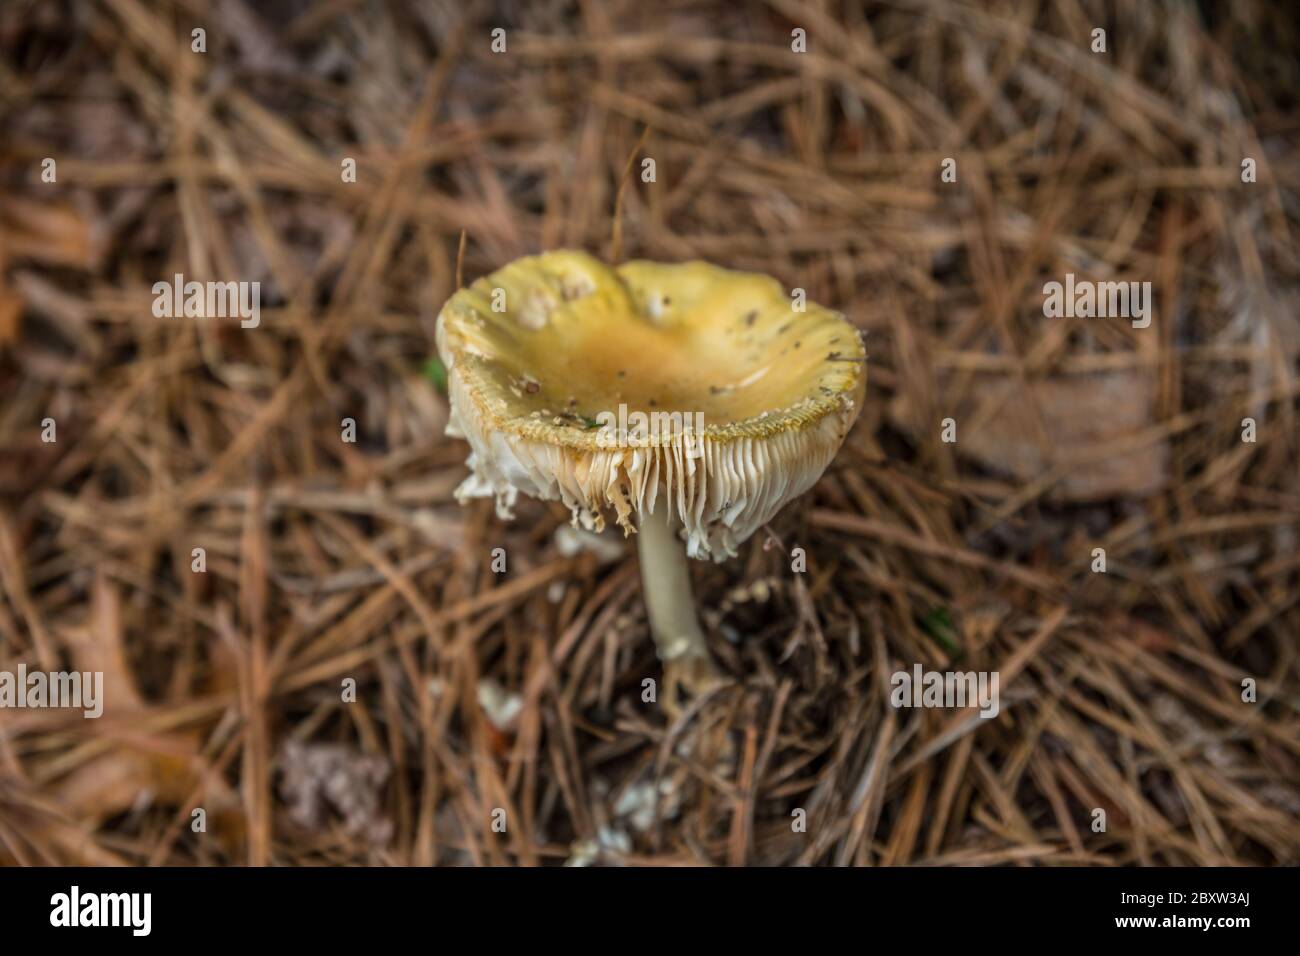 A large yellow concave mushroom tattered fully opened emerged from the forest floor of pine needles that surrounds the fungus closeup Stock Photo